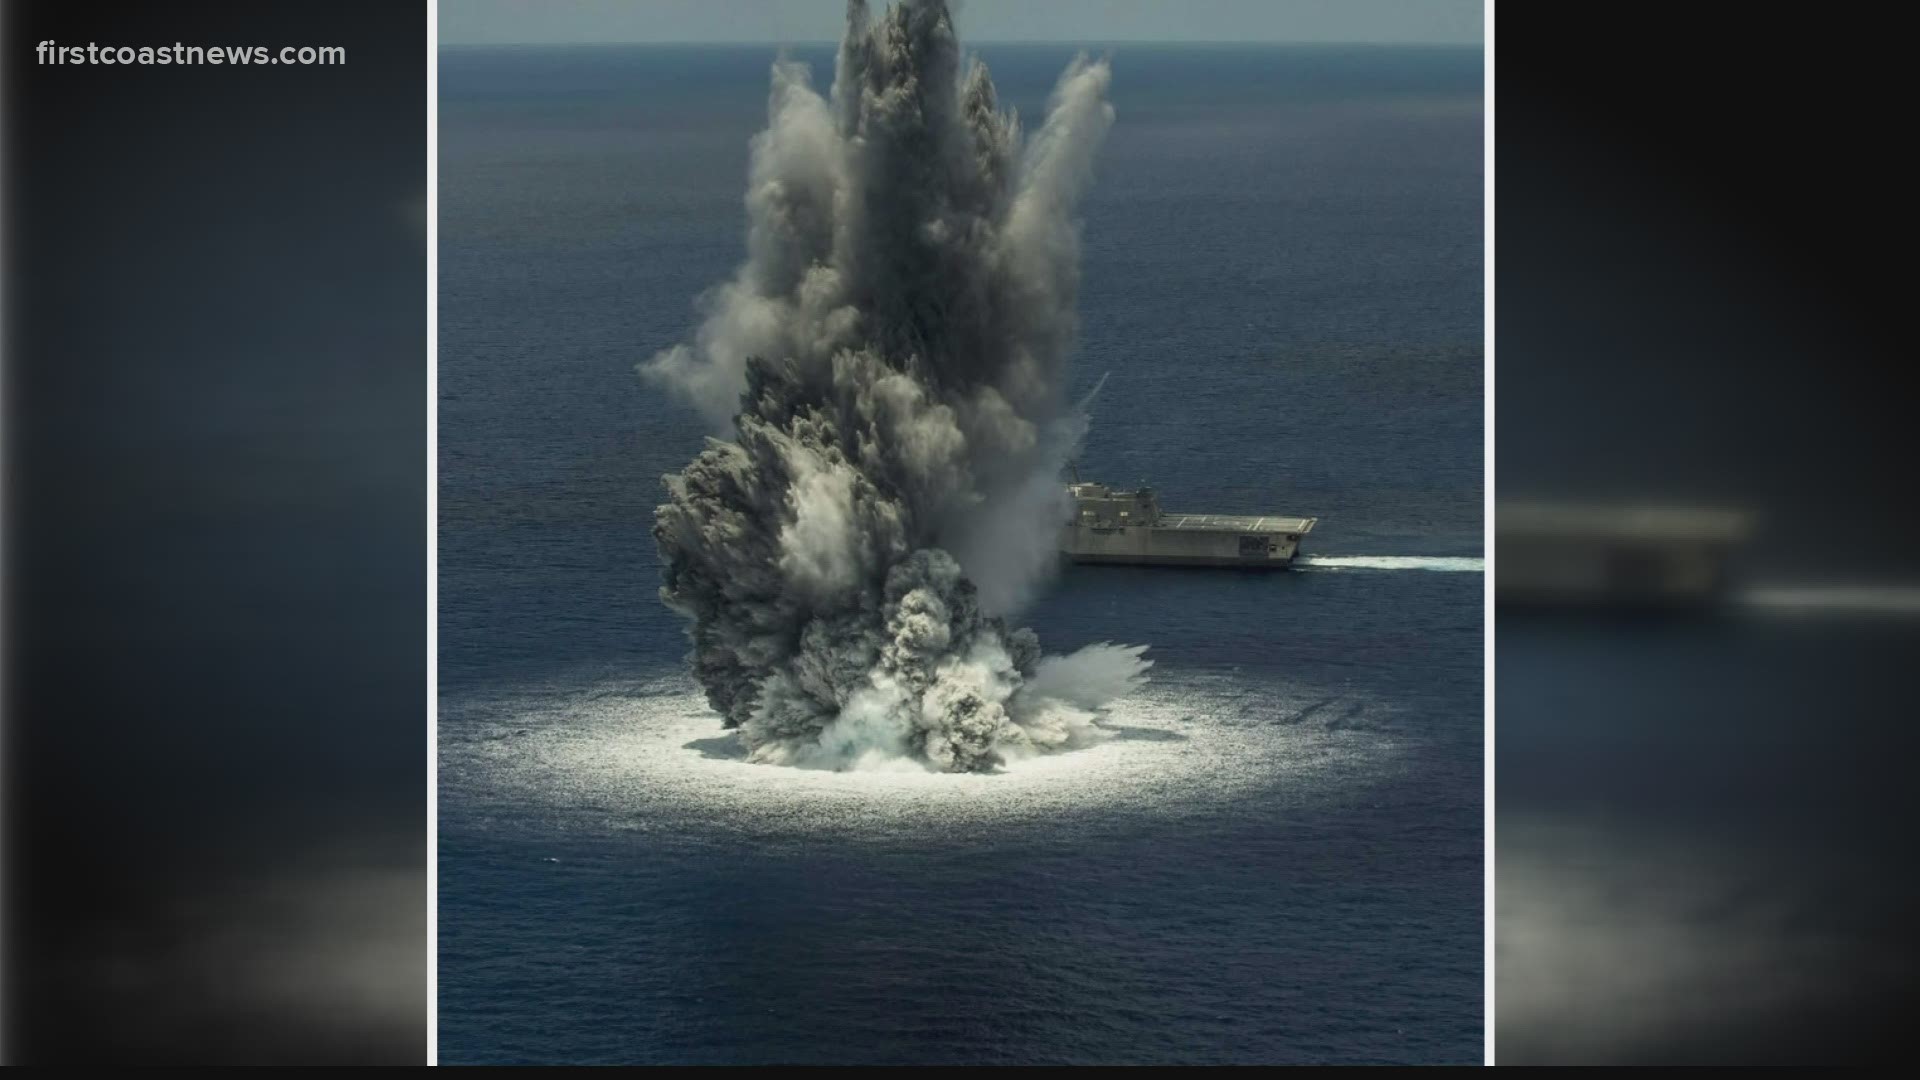 Military test explosion reported off Florida's coast